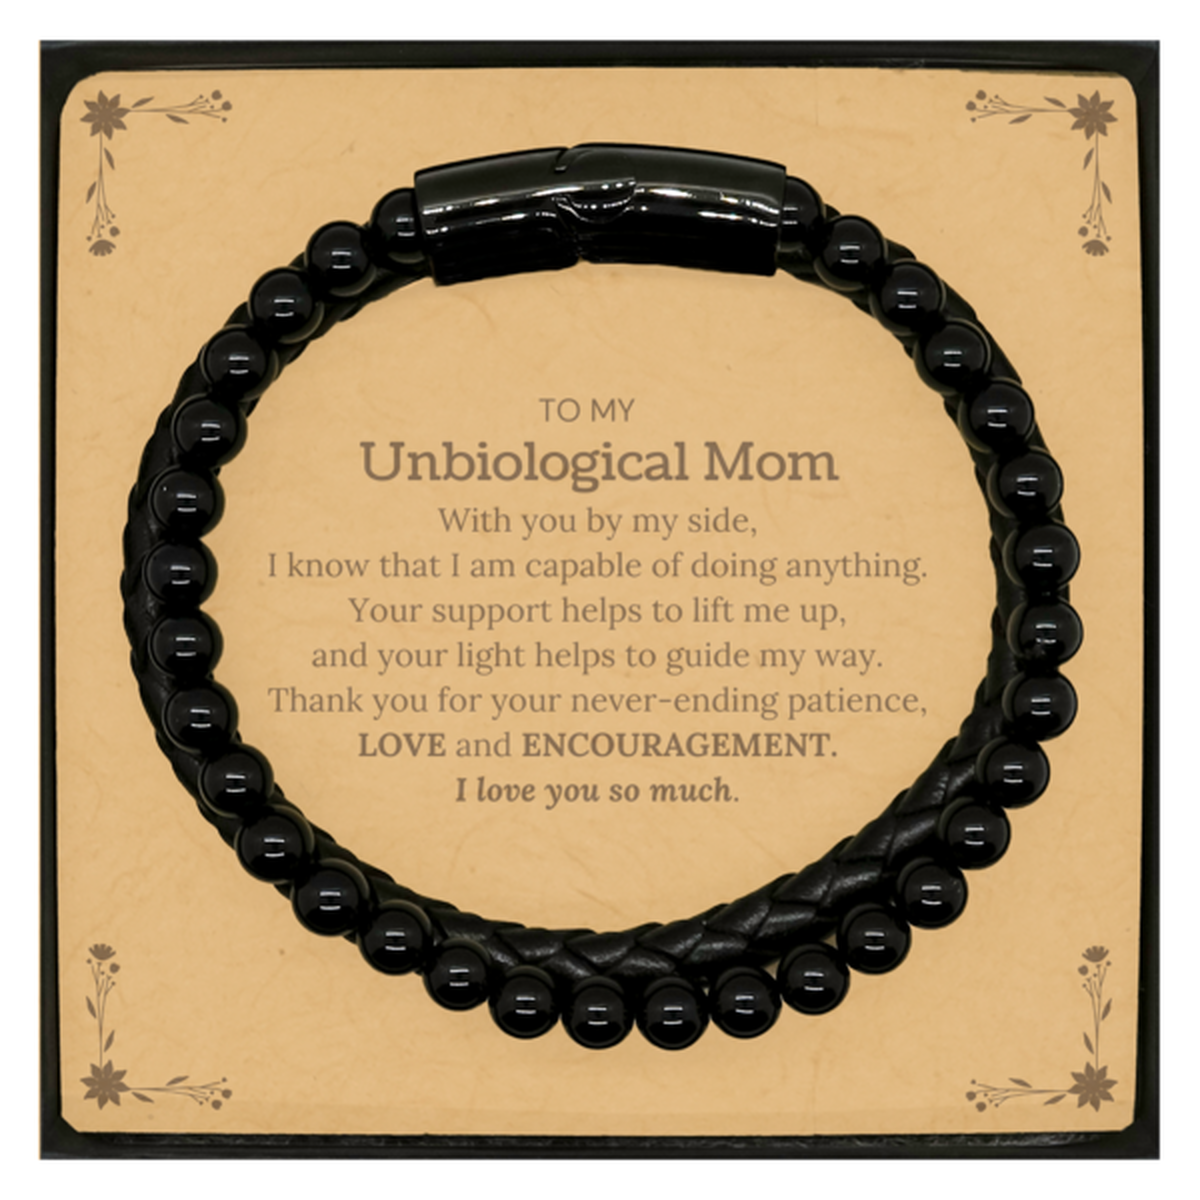 Appreciation Unbiological Mom Stone Leather Bracelets Gifts, To My Unbiological Mom Birthday Christmas Wedding Keepsake Gifts for Unbiological Mom With you by my side, I know that I am capable of doing anything. I love you so much